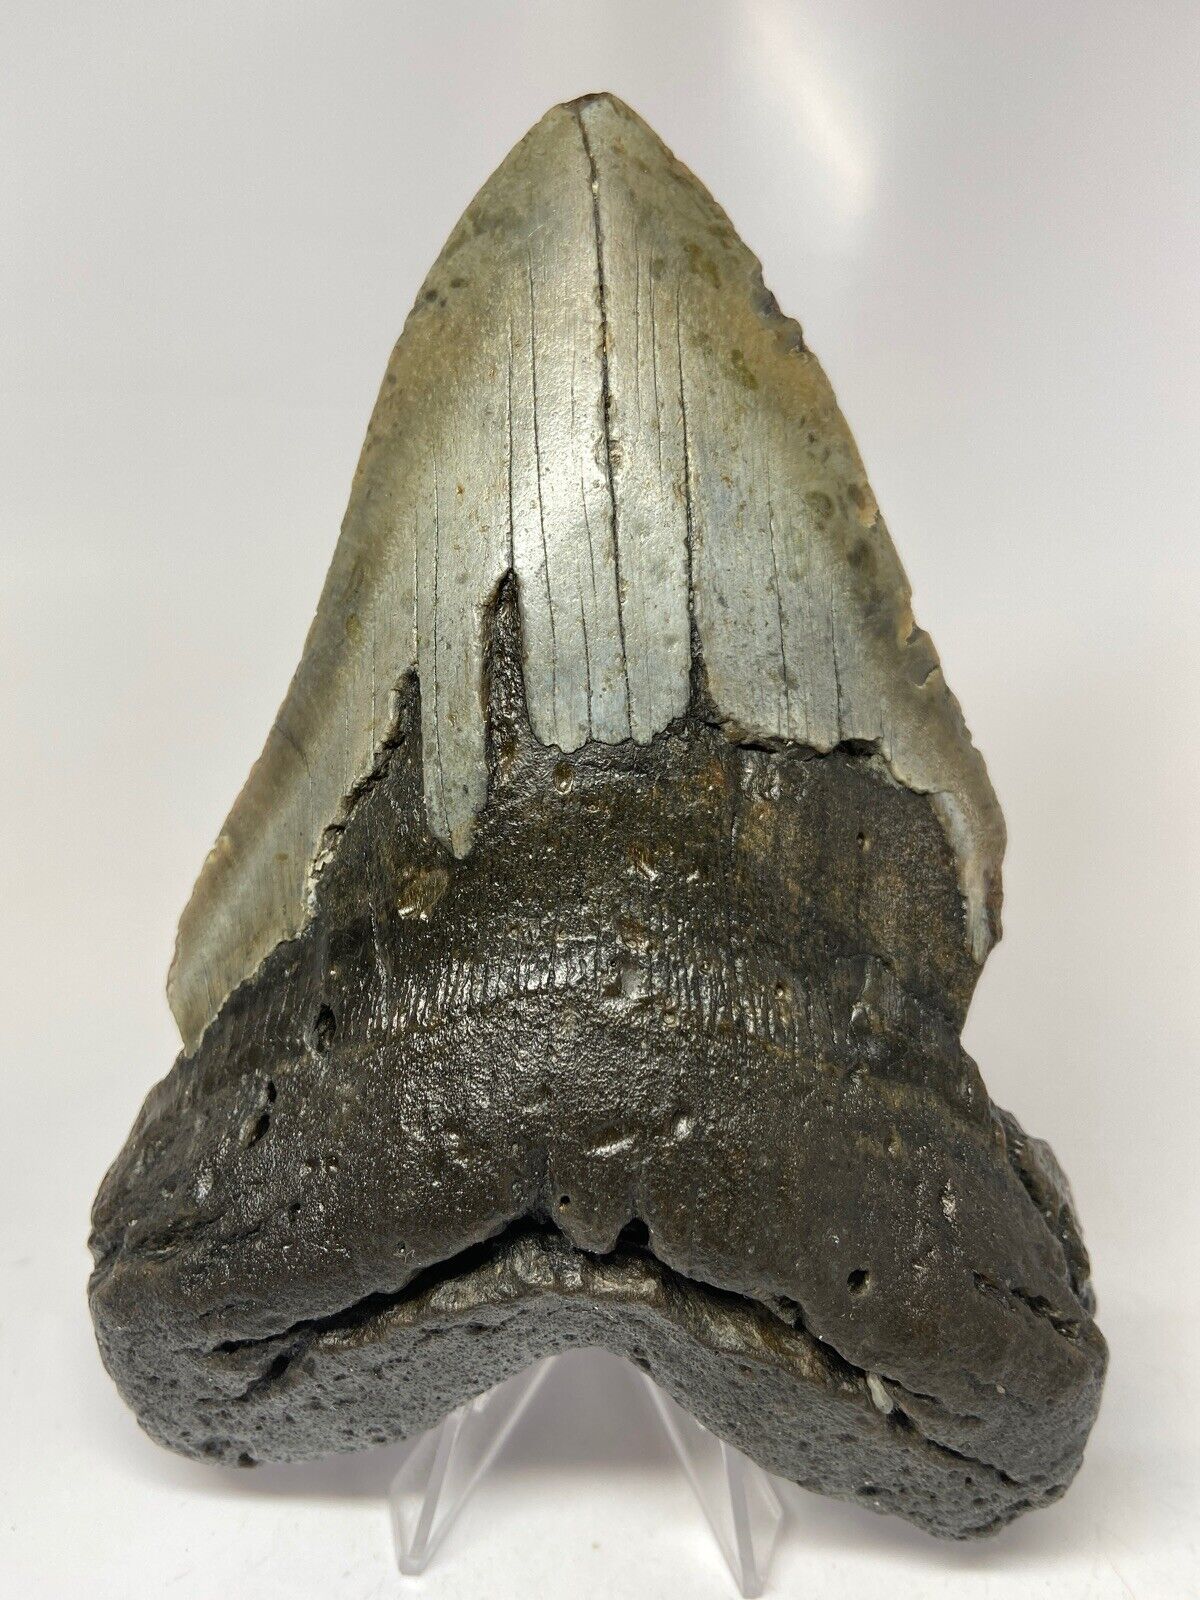 Megalodon Shark Tooth 6.08” Huge - Real Fossil - Giant 5518